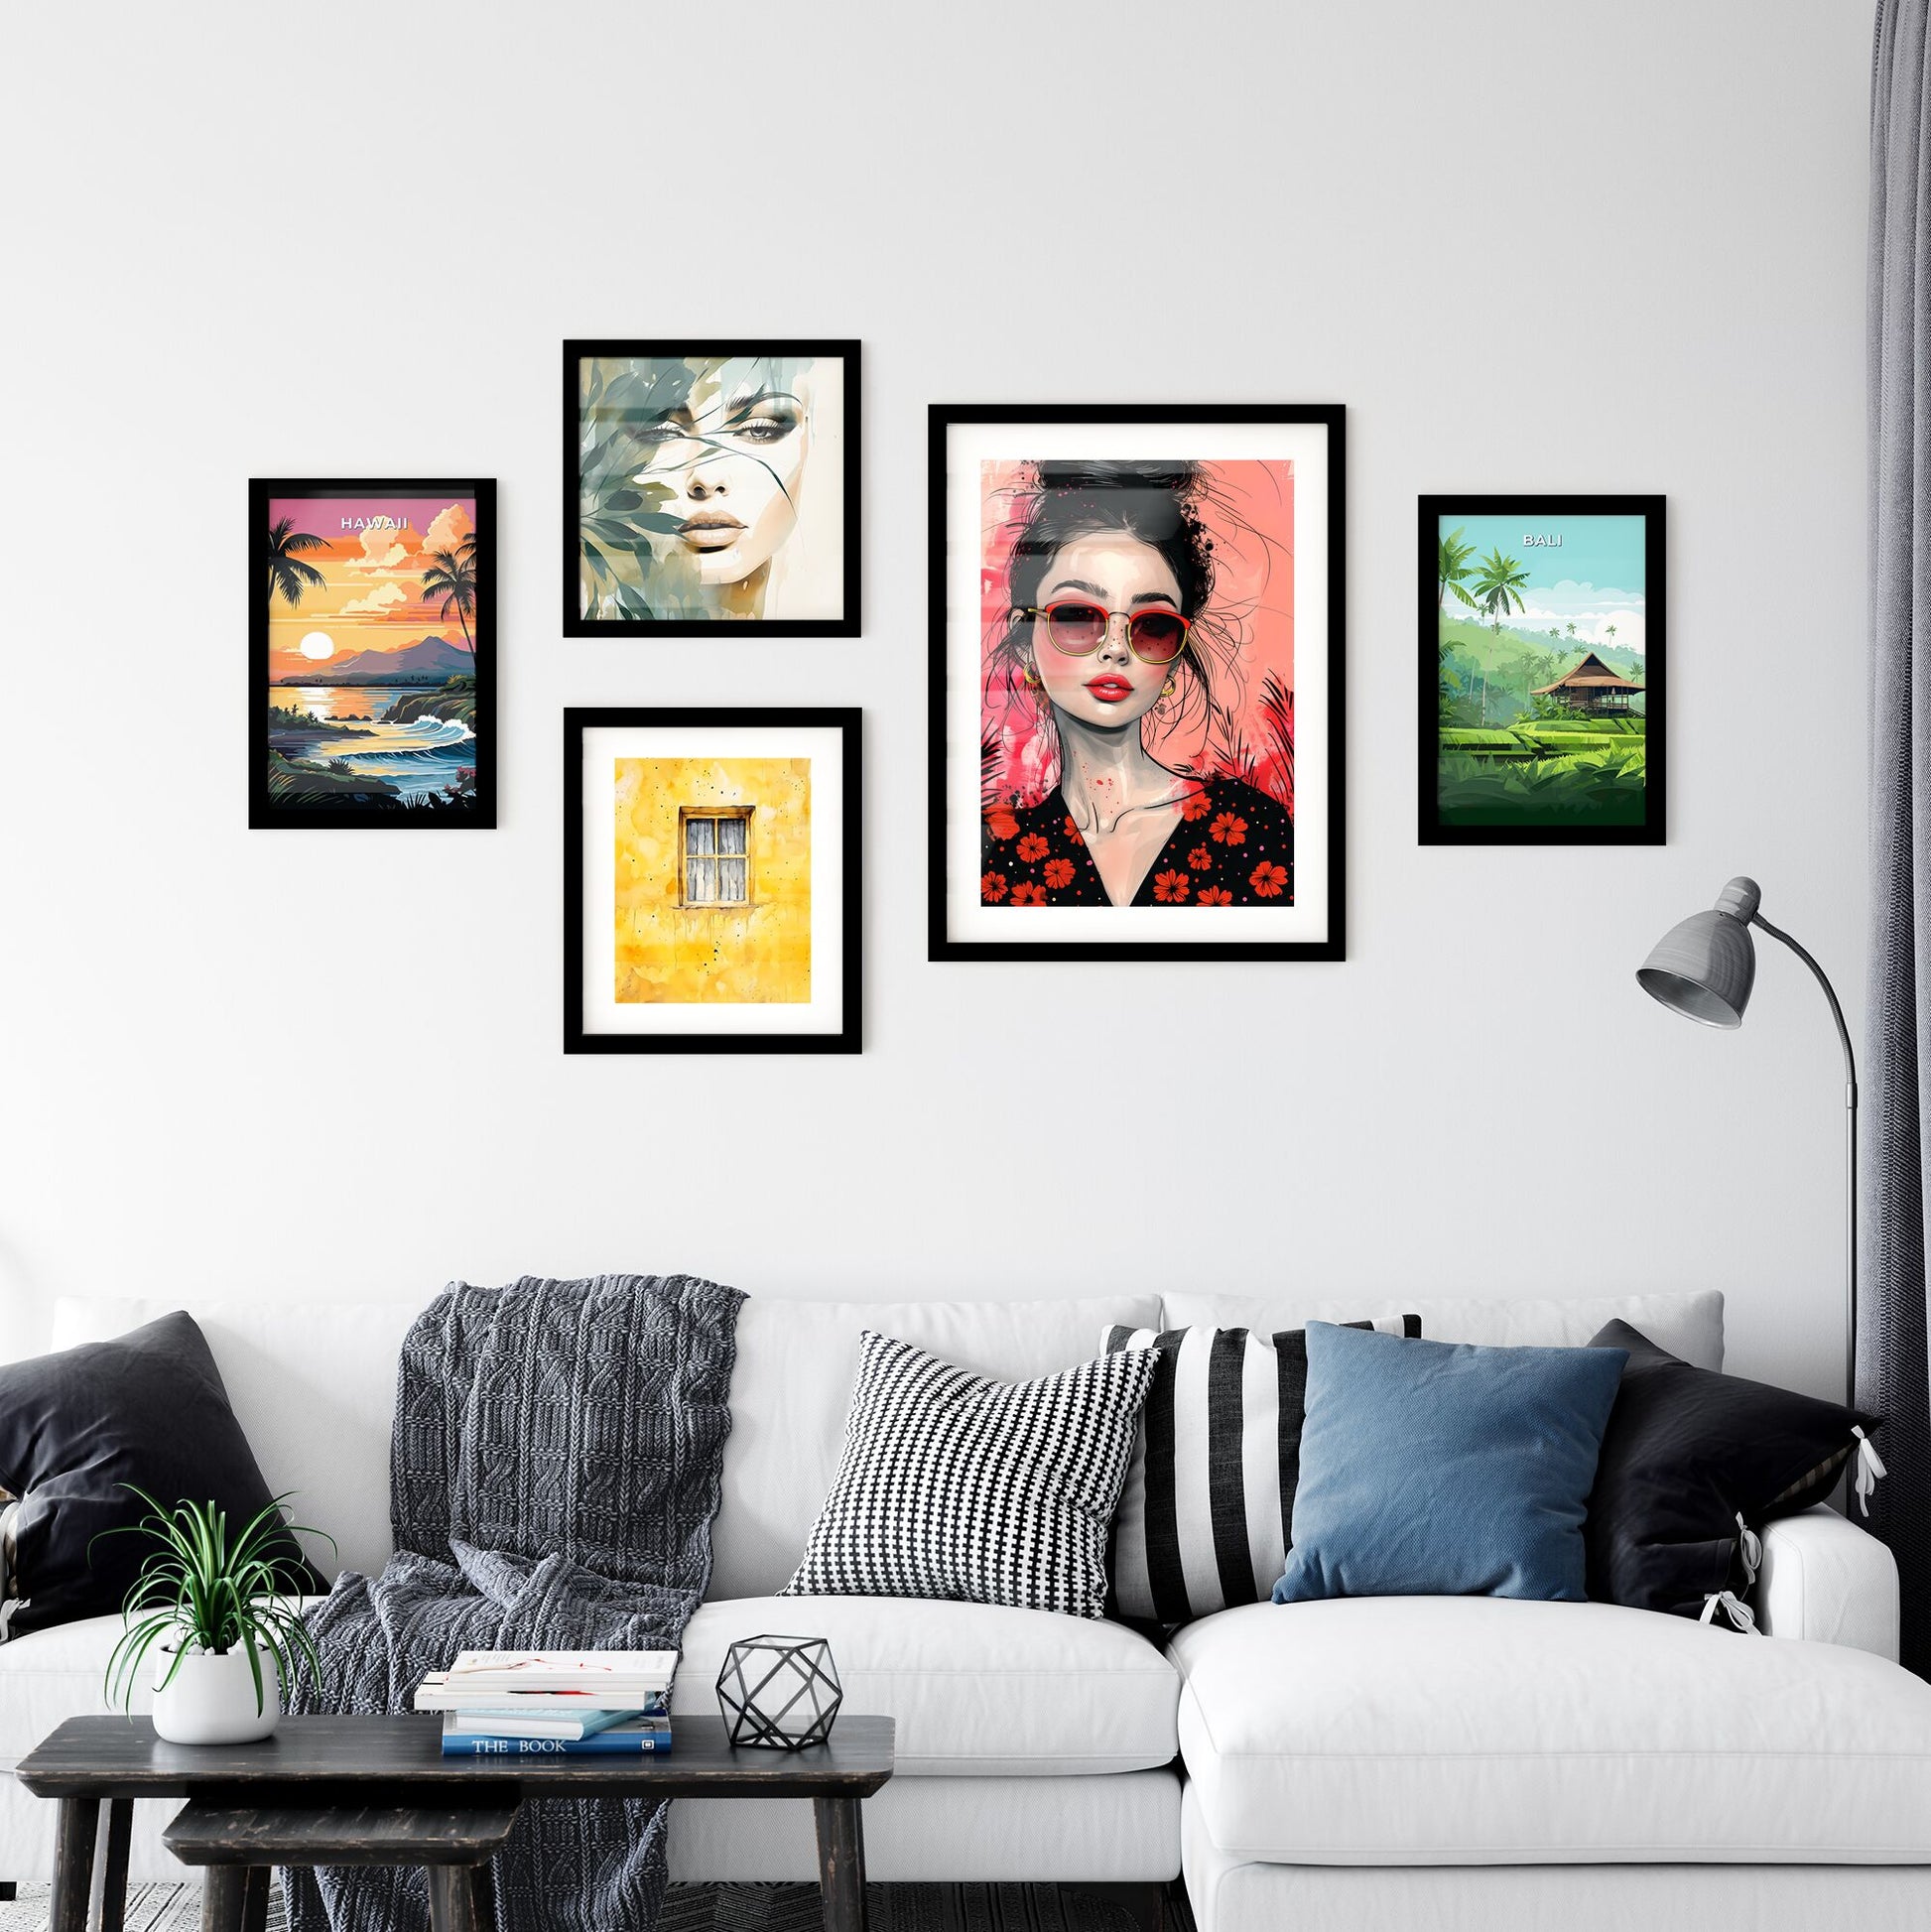 Abstract, Quirky, Modern Painting, Black Shirt Woman, Sunglasses, Trendy, Vibrant Art Default Title